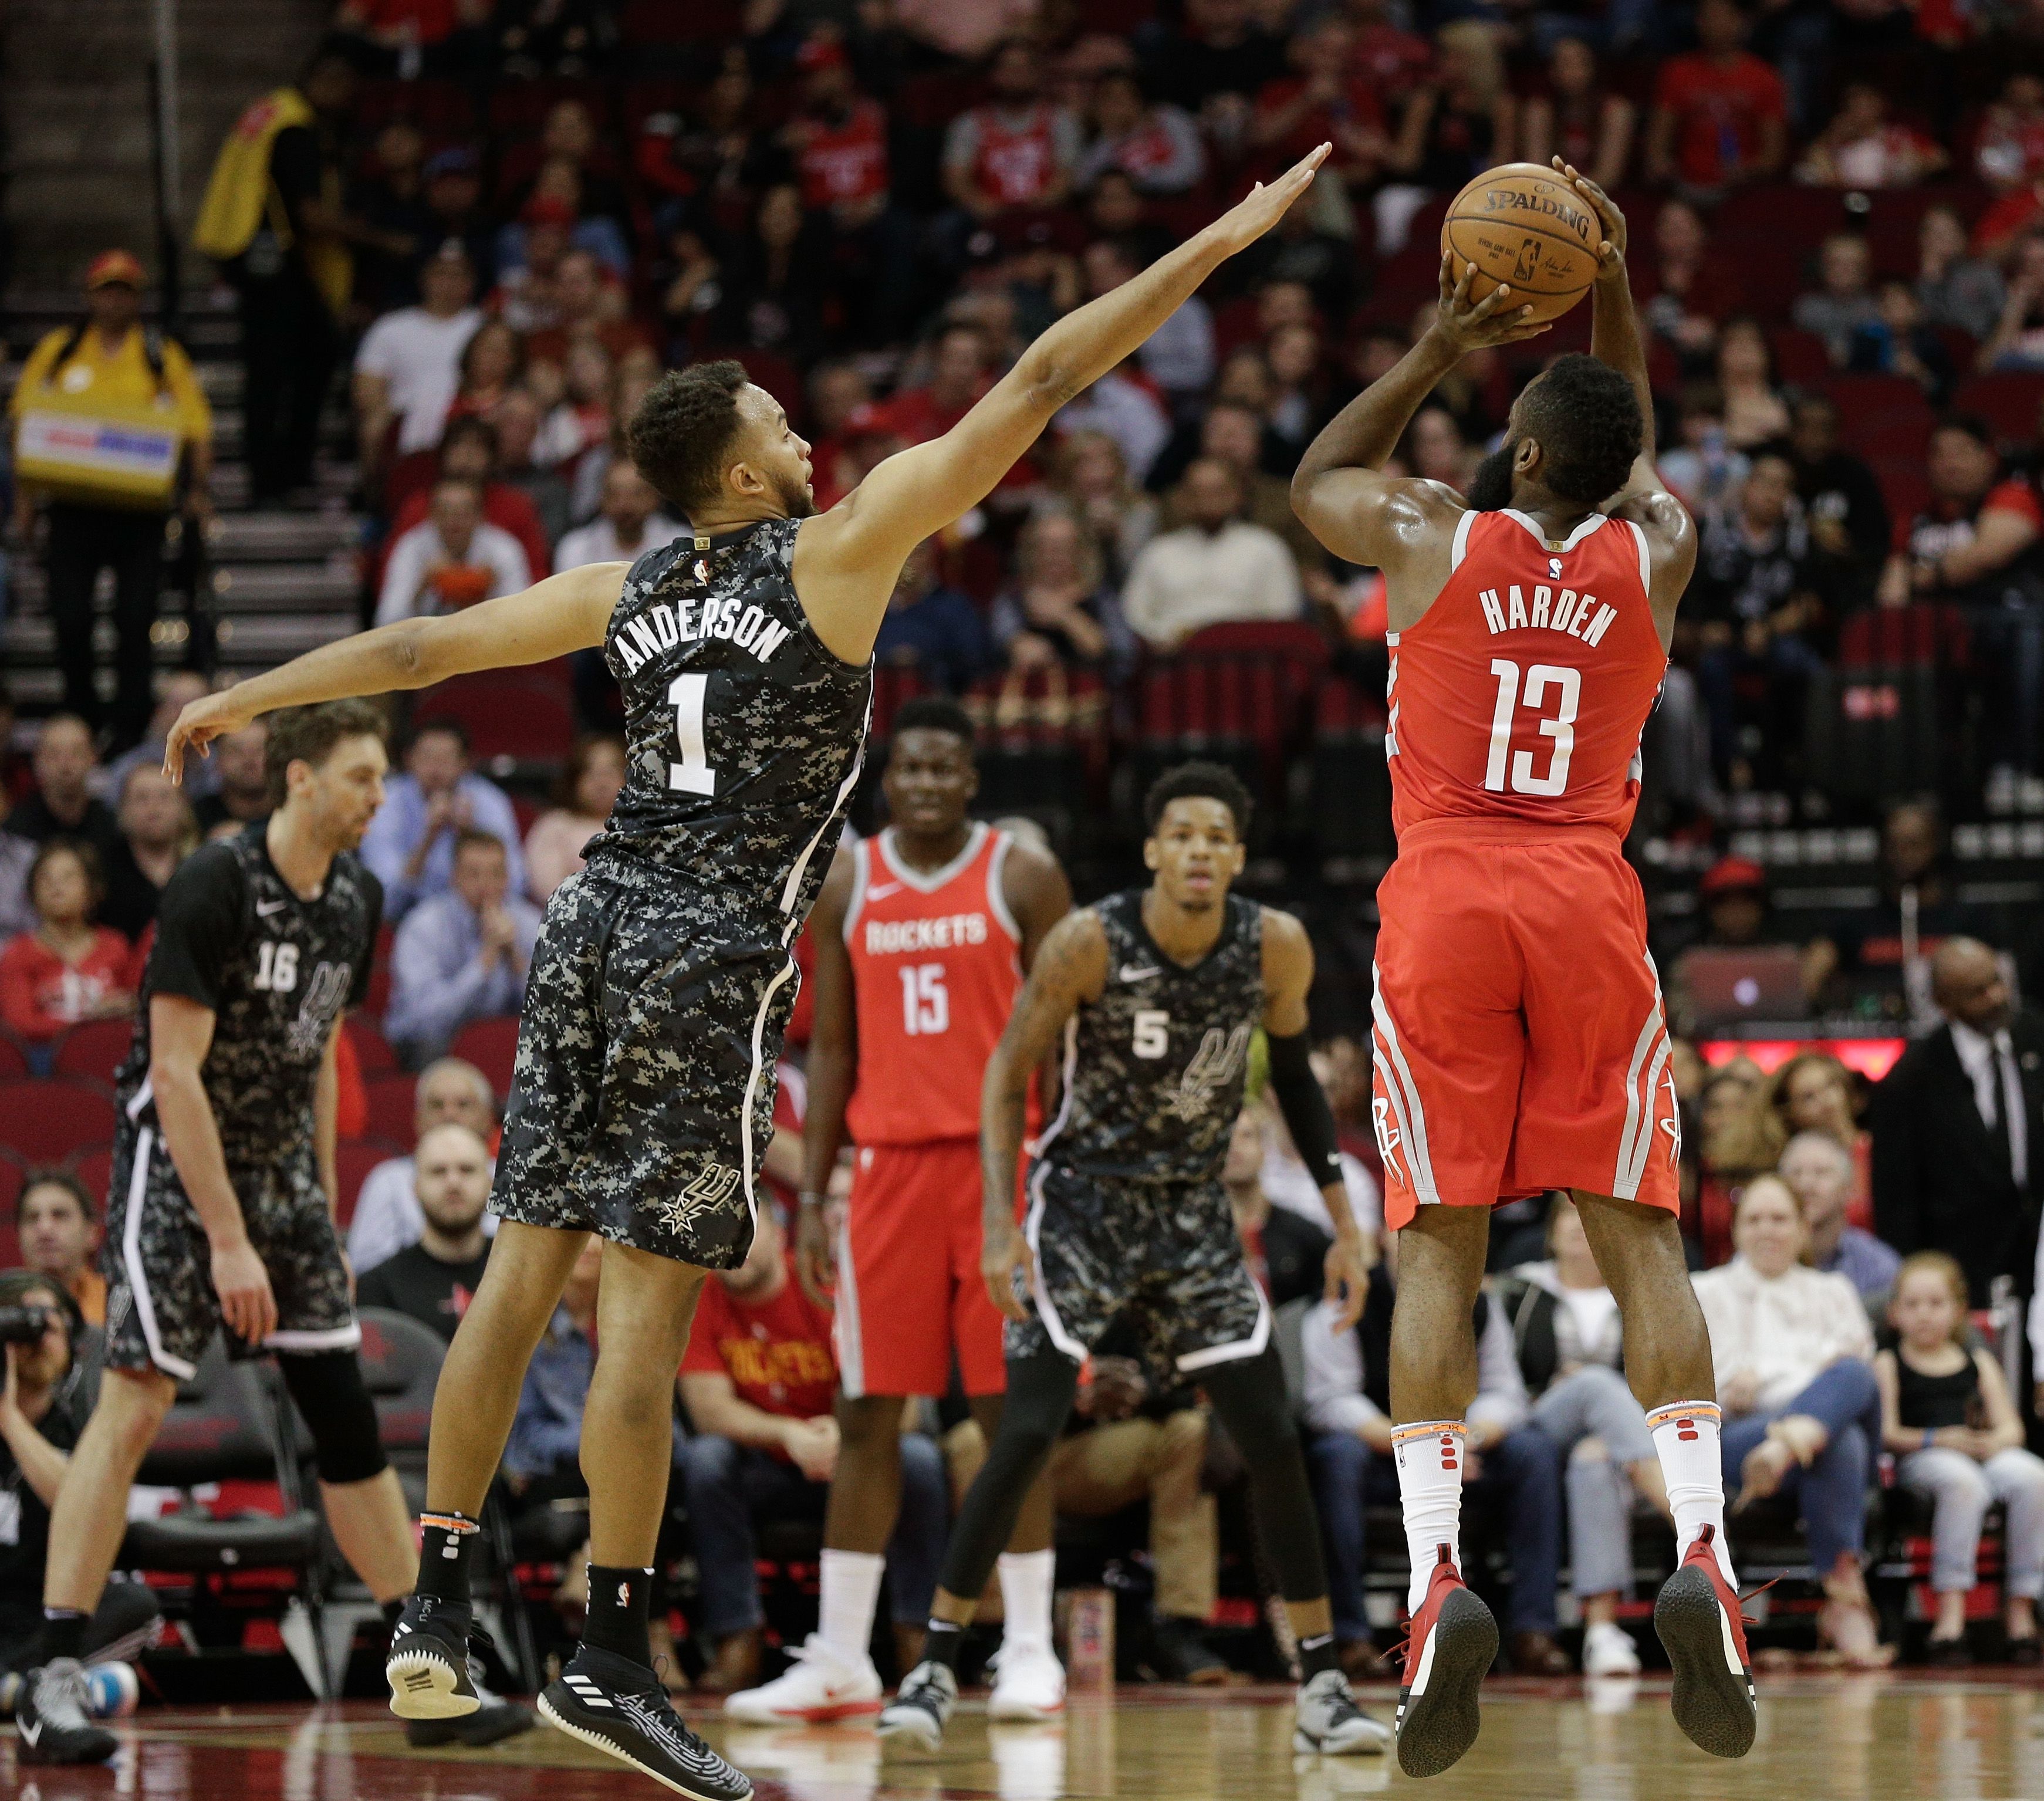 Spurs vs. Rockets recap, reactions: Welcome to the 10th seed